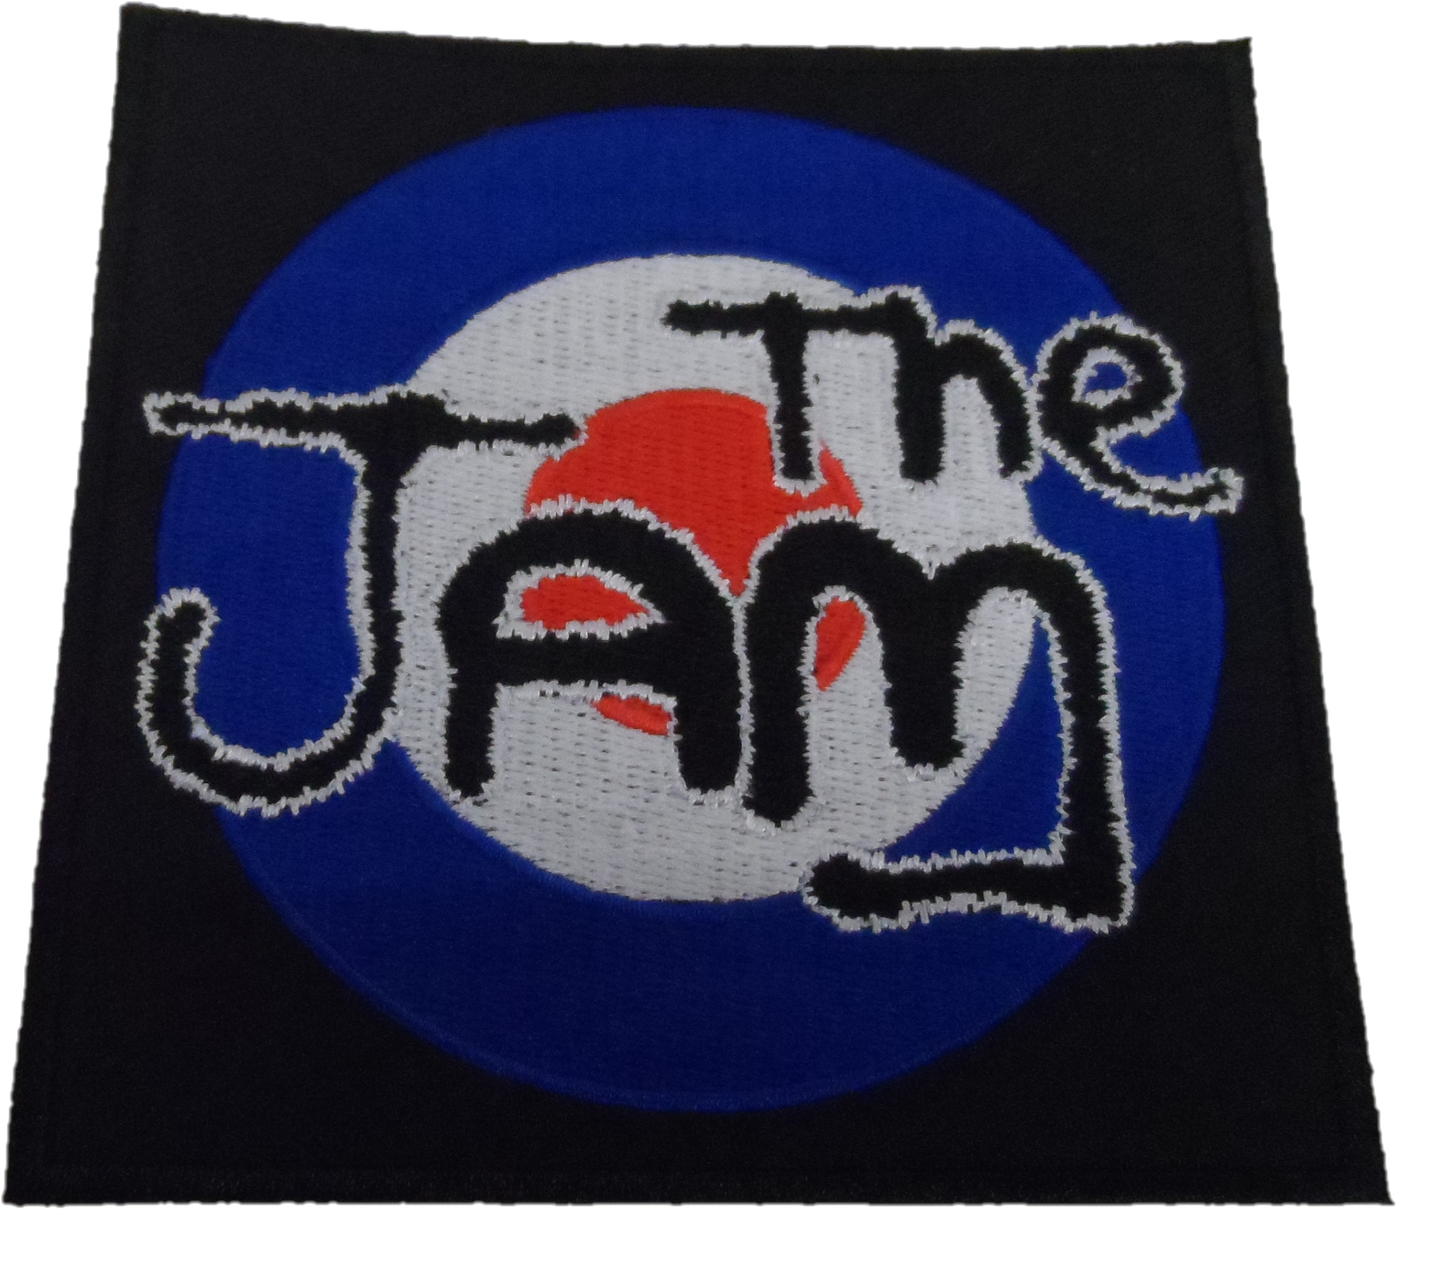 The Jam Iron On Arm Patches